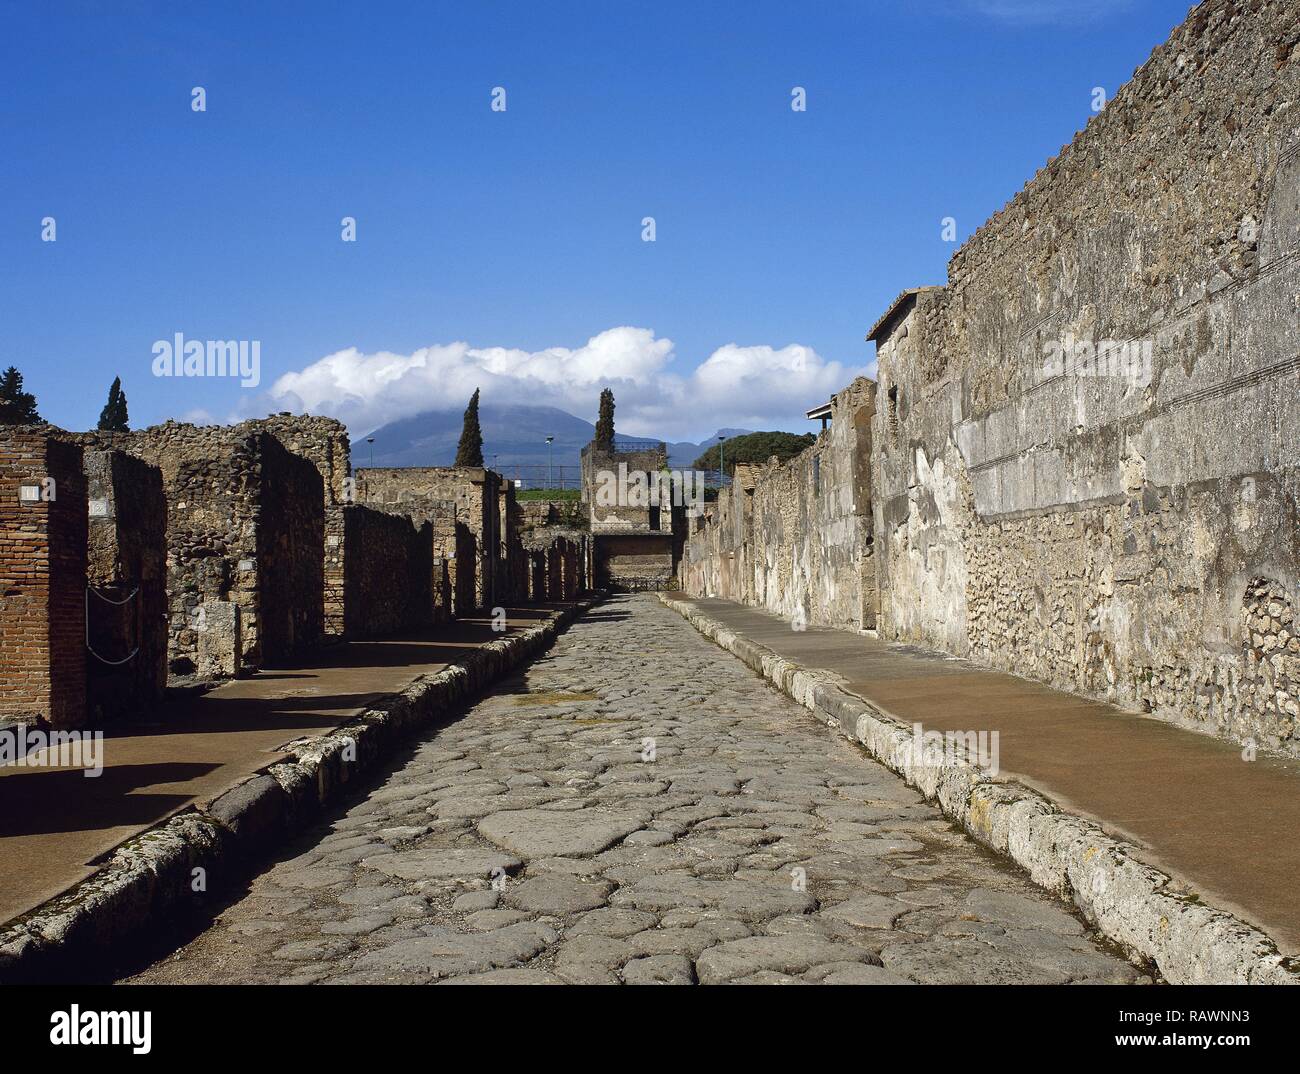 Italy. Pompeii. Ancient Roman city destroyed by the eruption of the Vesuvius in 79 CE. View of Mercurio Street. Via di Mercurio is a short yet primary street running north to south in the northwestern section of the city. La Campania. Stock Photo